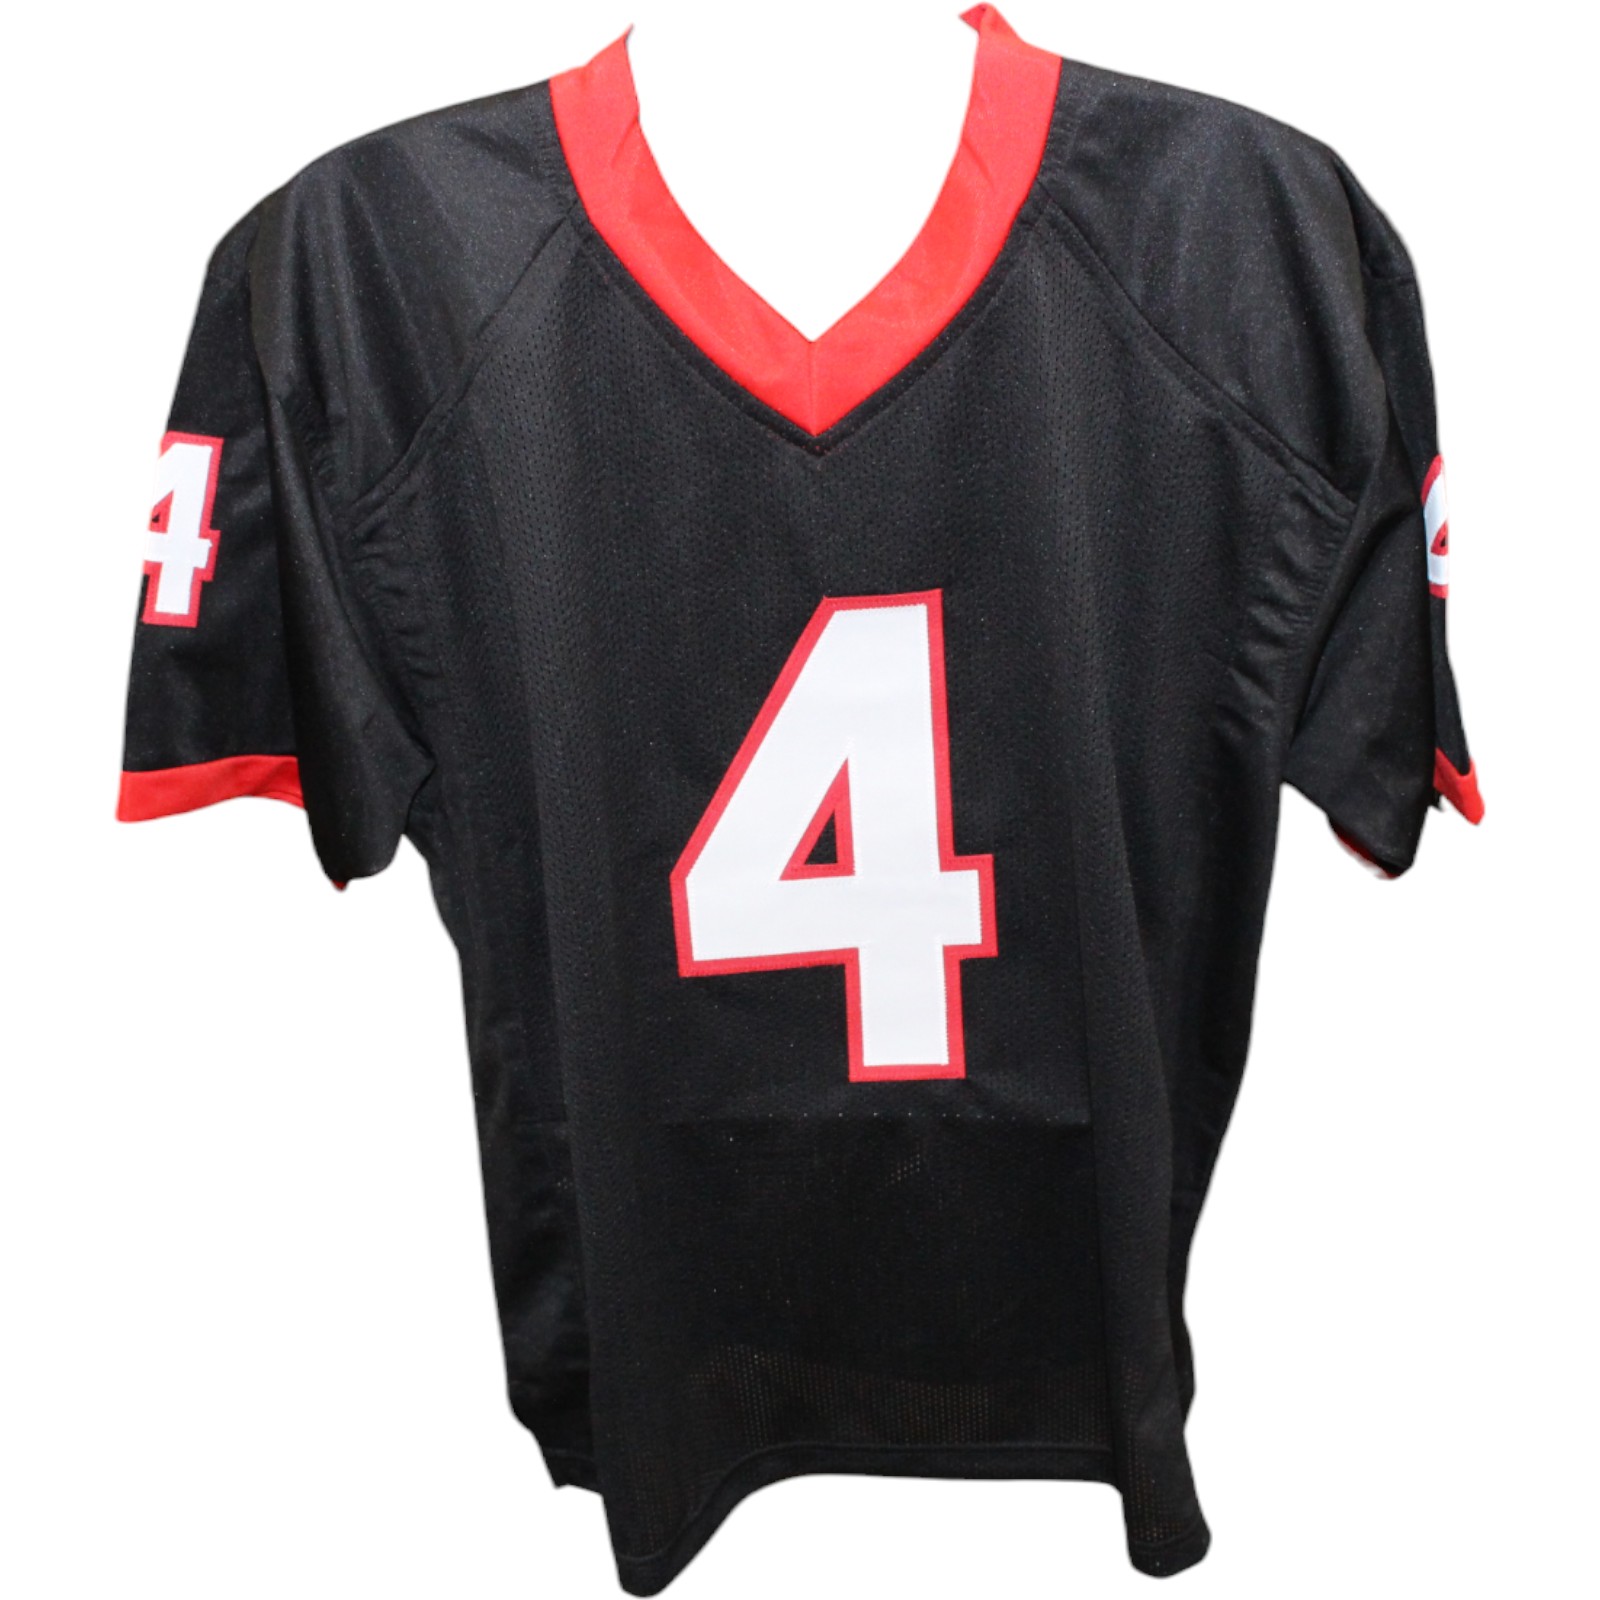 Champ Bailey Autographed/Signed College Style Black Jersey Beckett